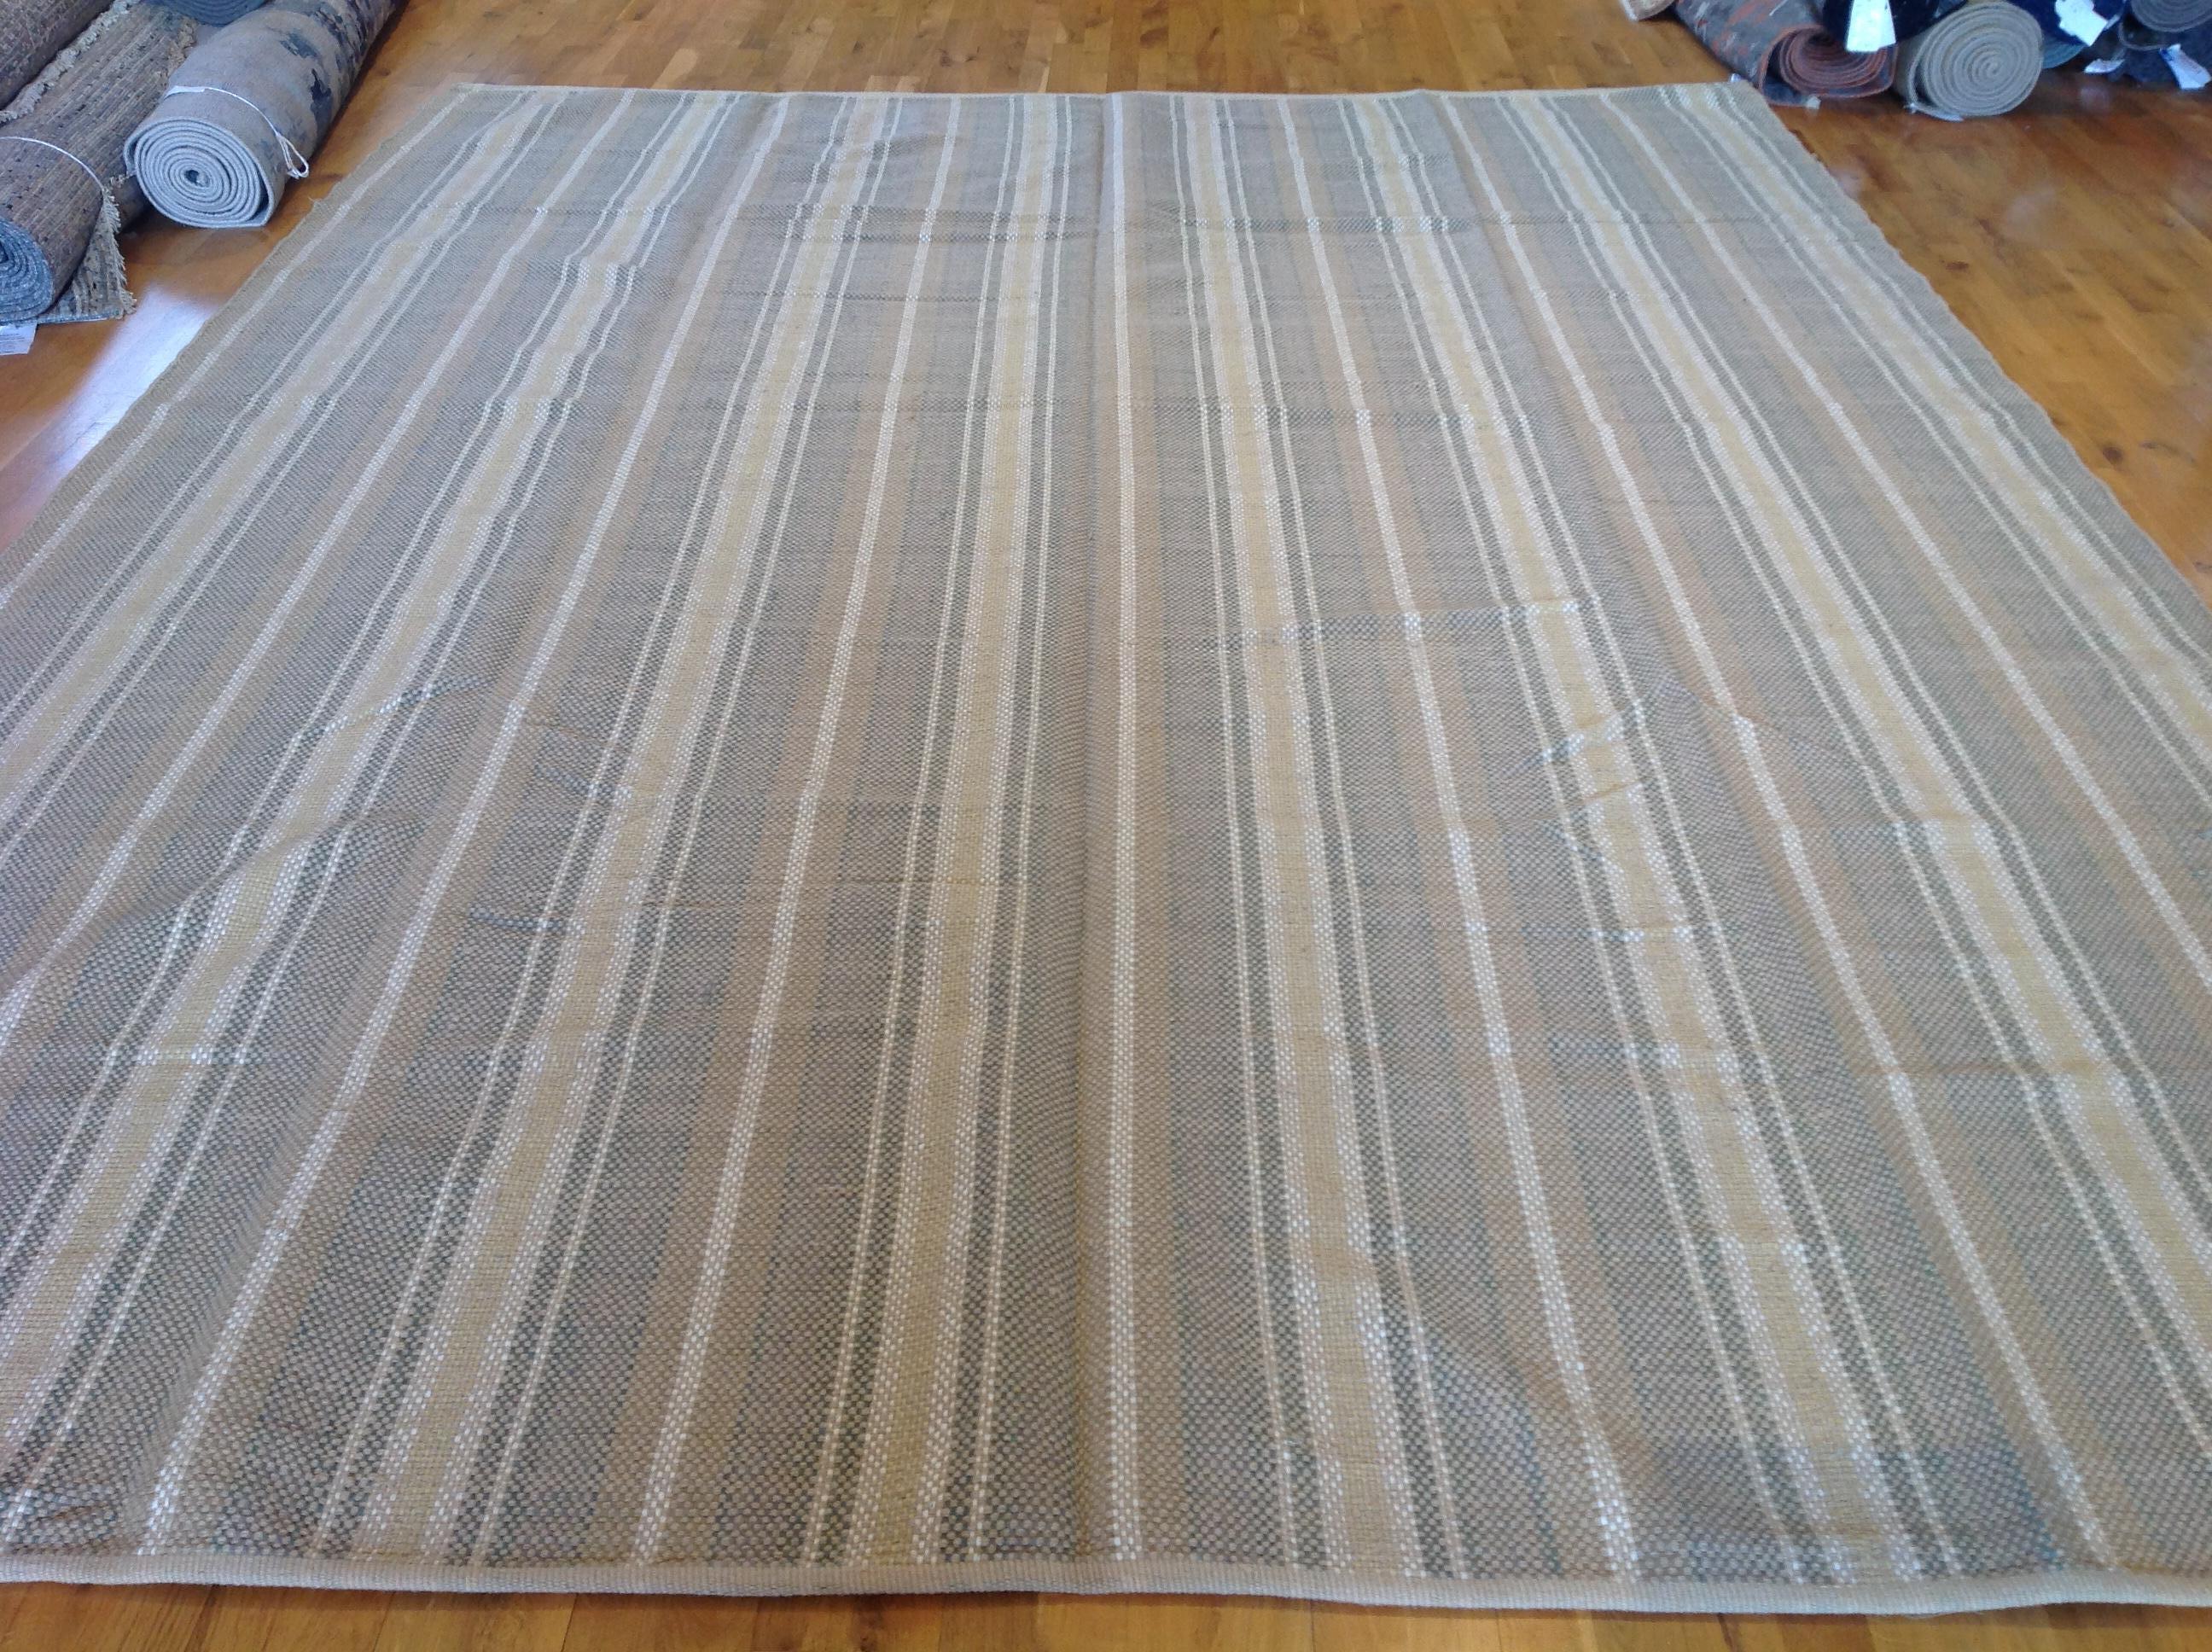 A thick, handwoven flat-weave for a classic yet relaxed look. Flat-weave rugs are amazingly versatile -- they're light weight so easy to move, reversible and work on their own or layered with other rugs. And as a final plus, they're durable but also